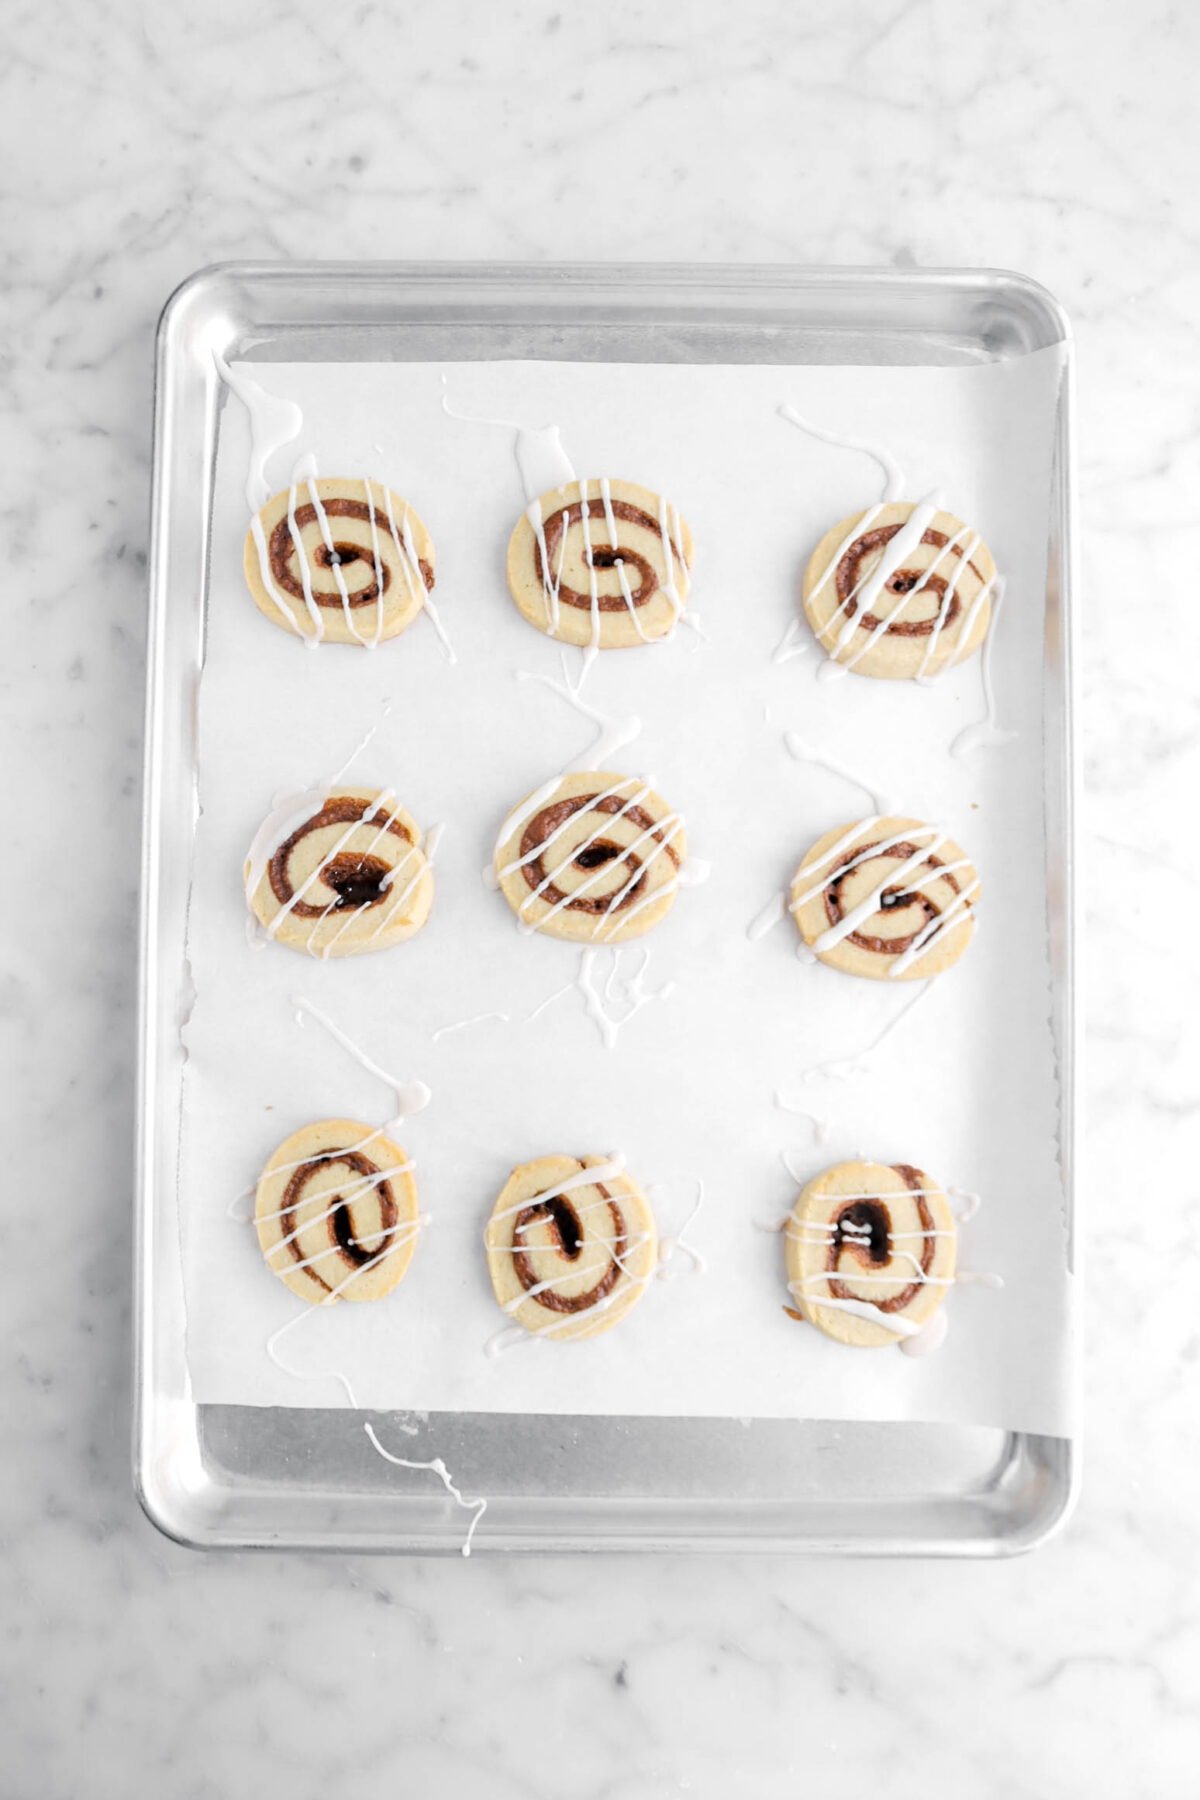 baked cinnamon roll cookies on sheet pan with icing drizzled over the top.